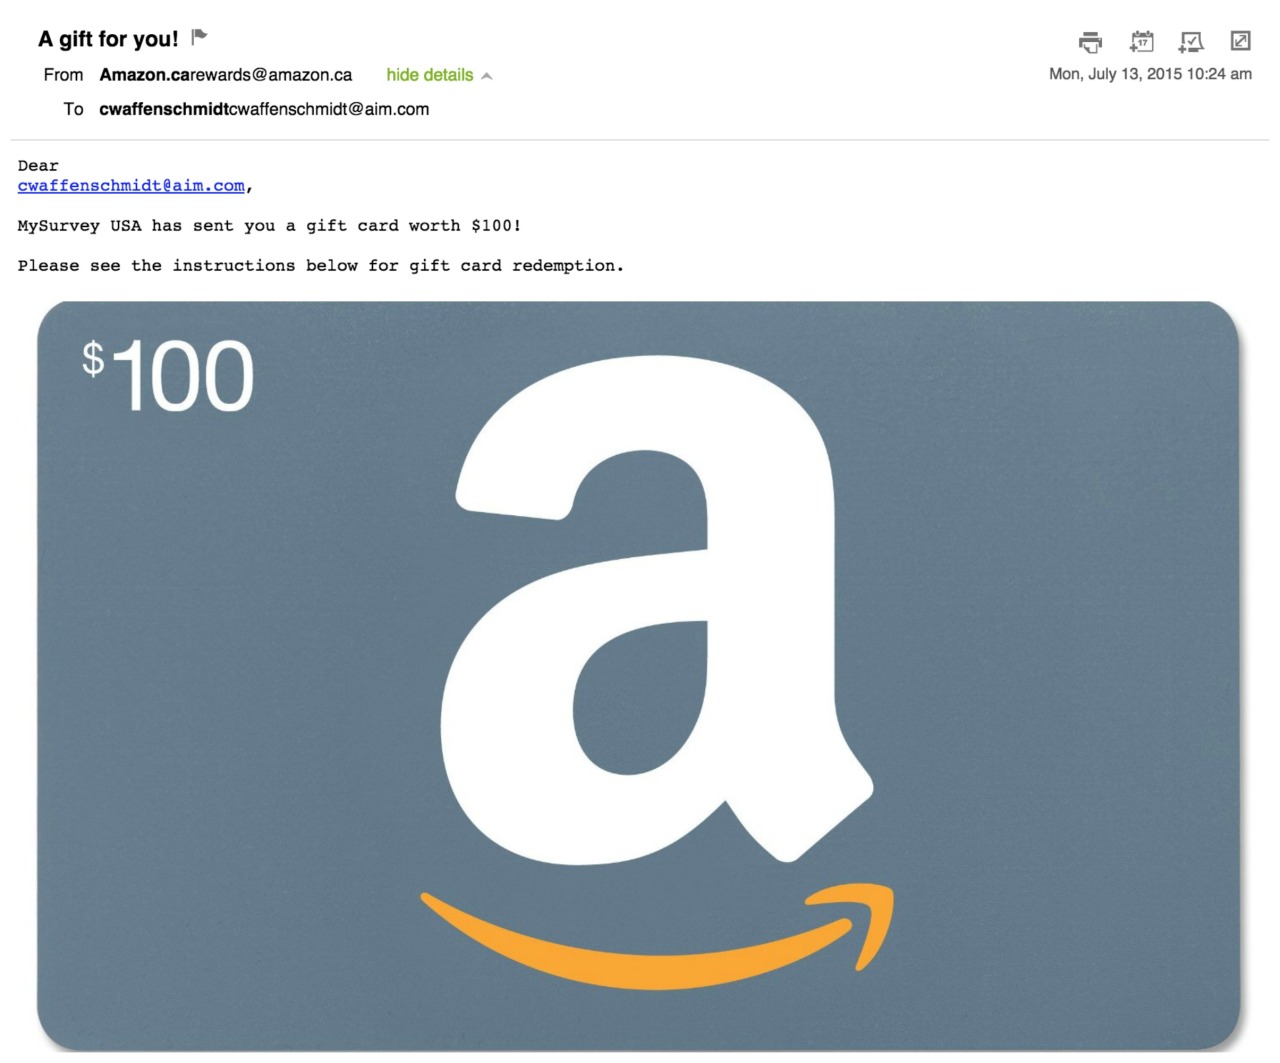 Hey there. — OMG I just got an Amazon gift card for